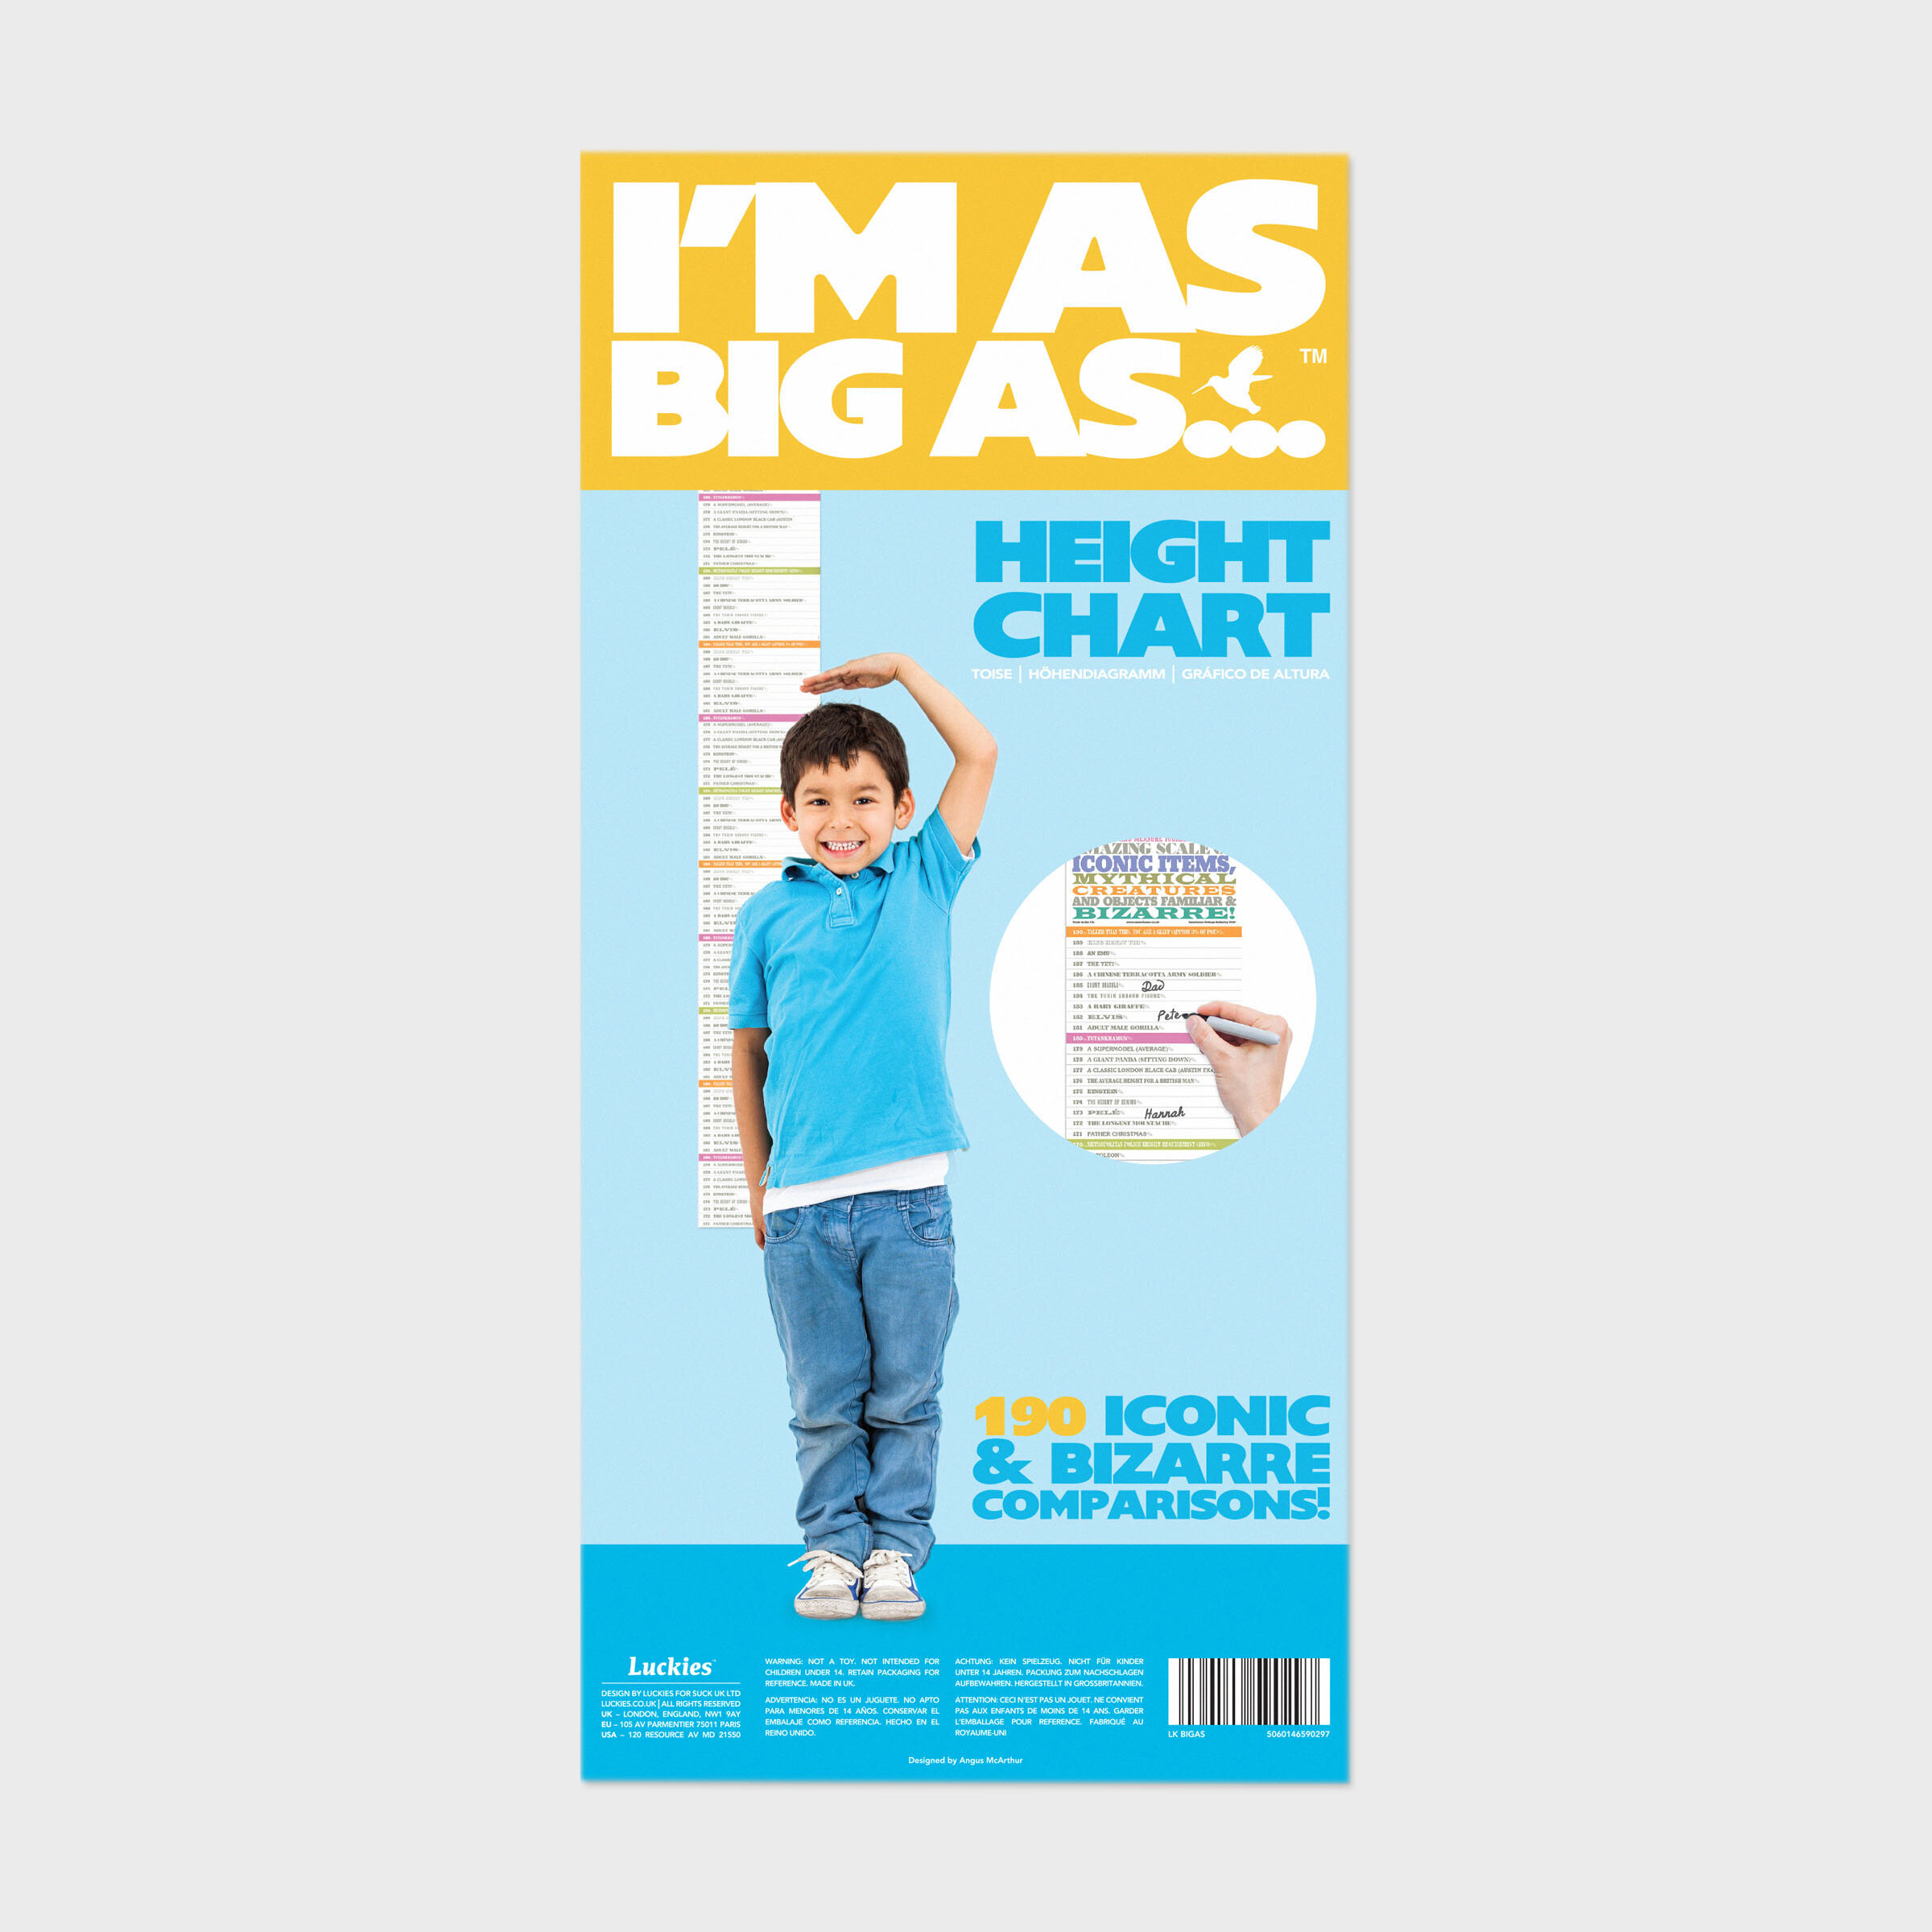 I'm As Big As - Height Chart packaging